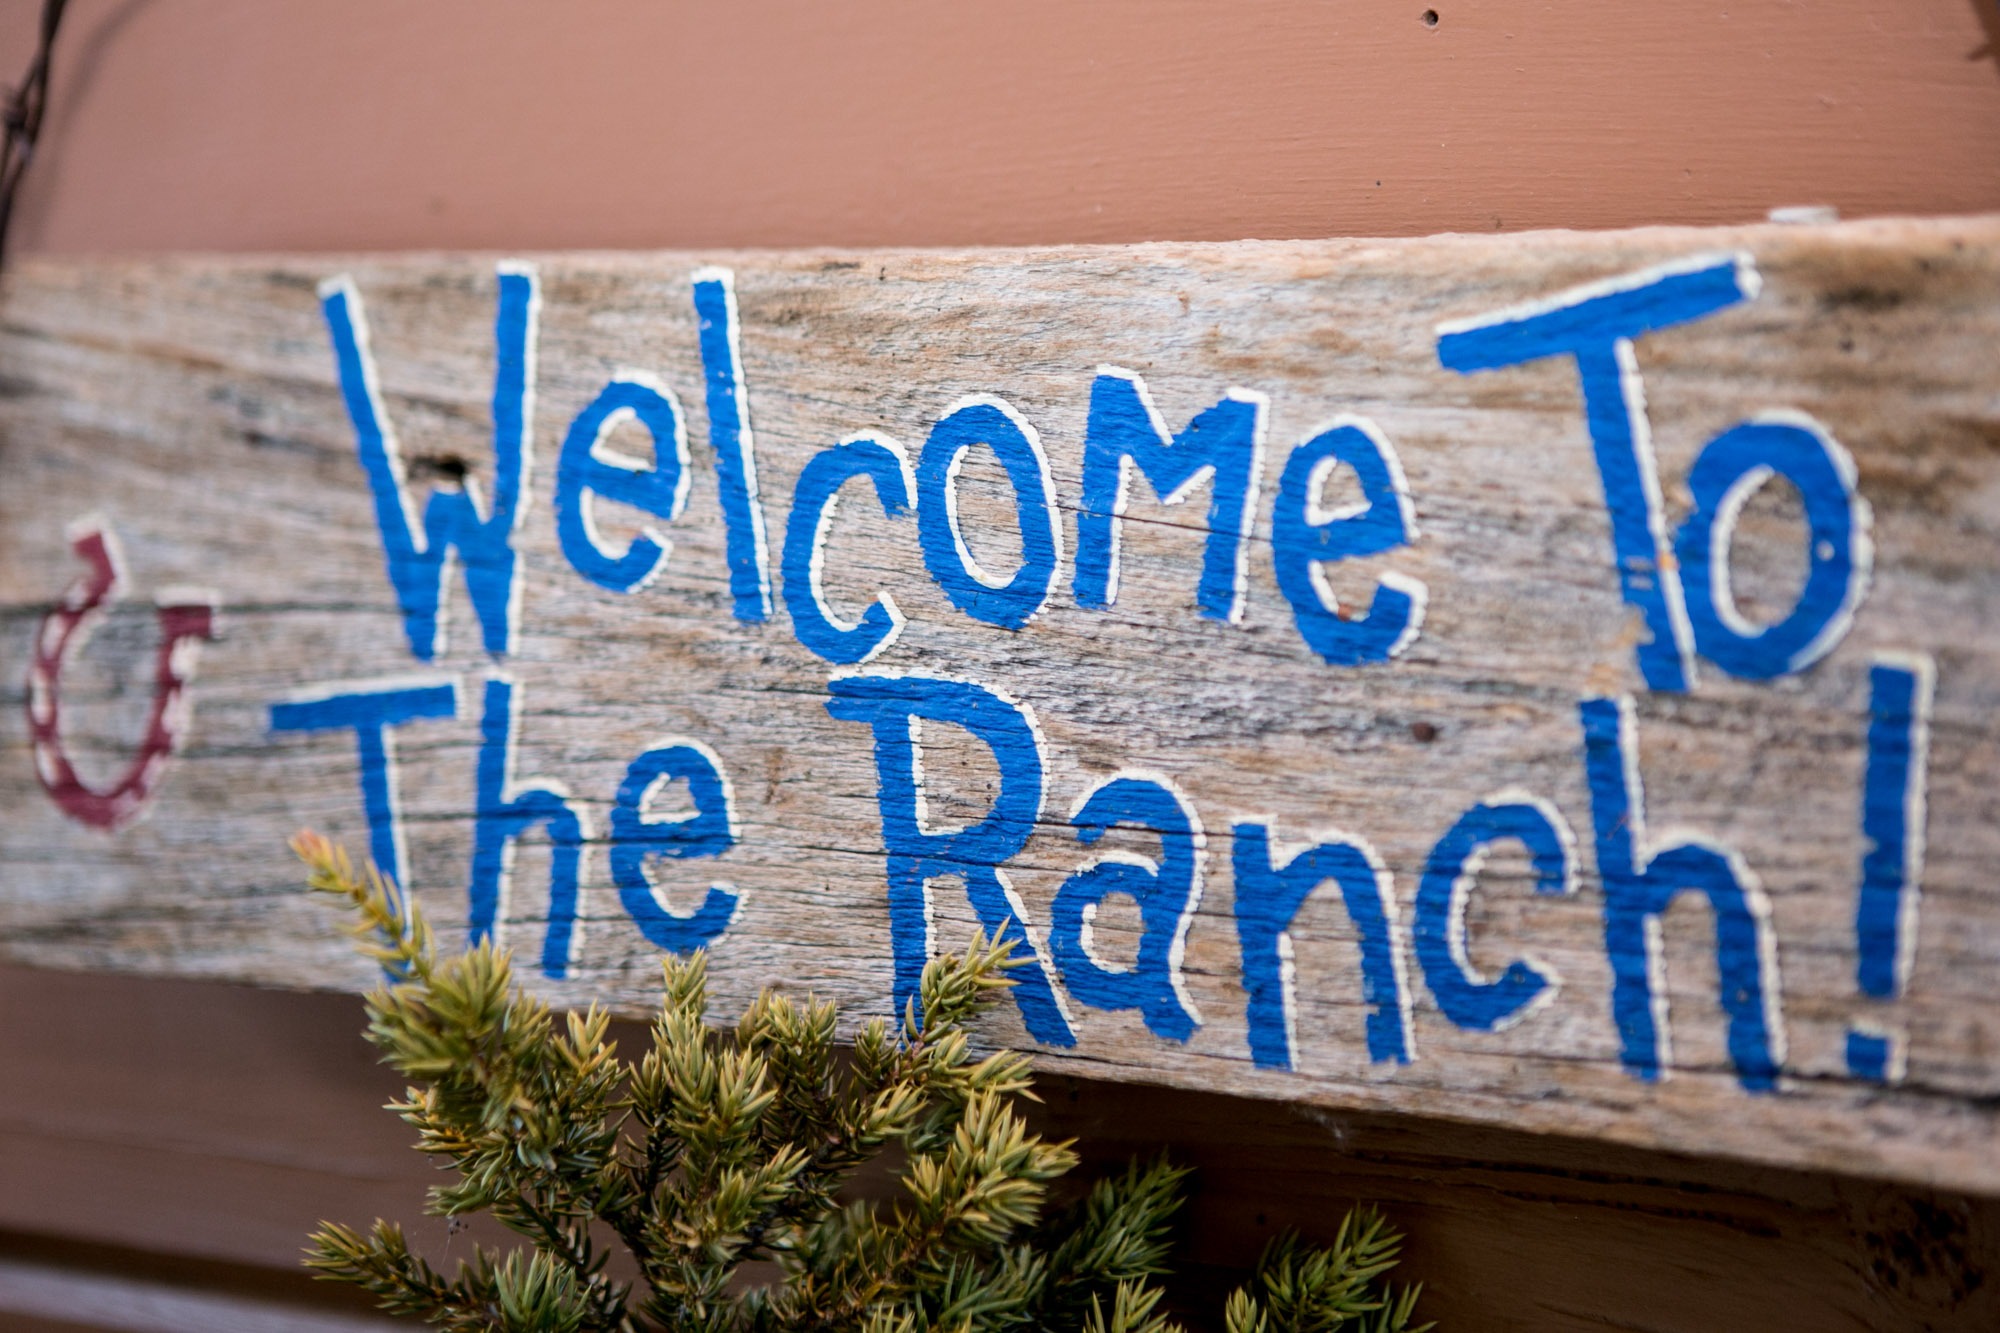 wooden sign painted with blue words that say welcome to the ranch